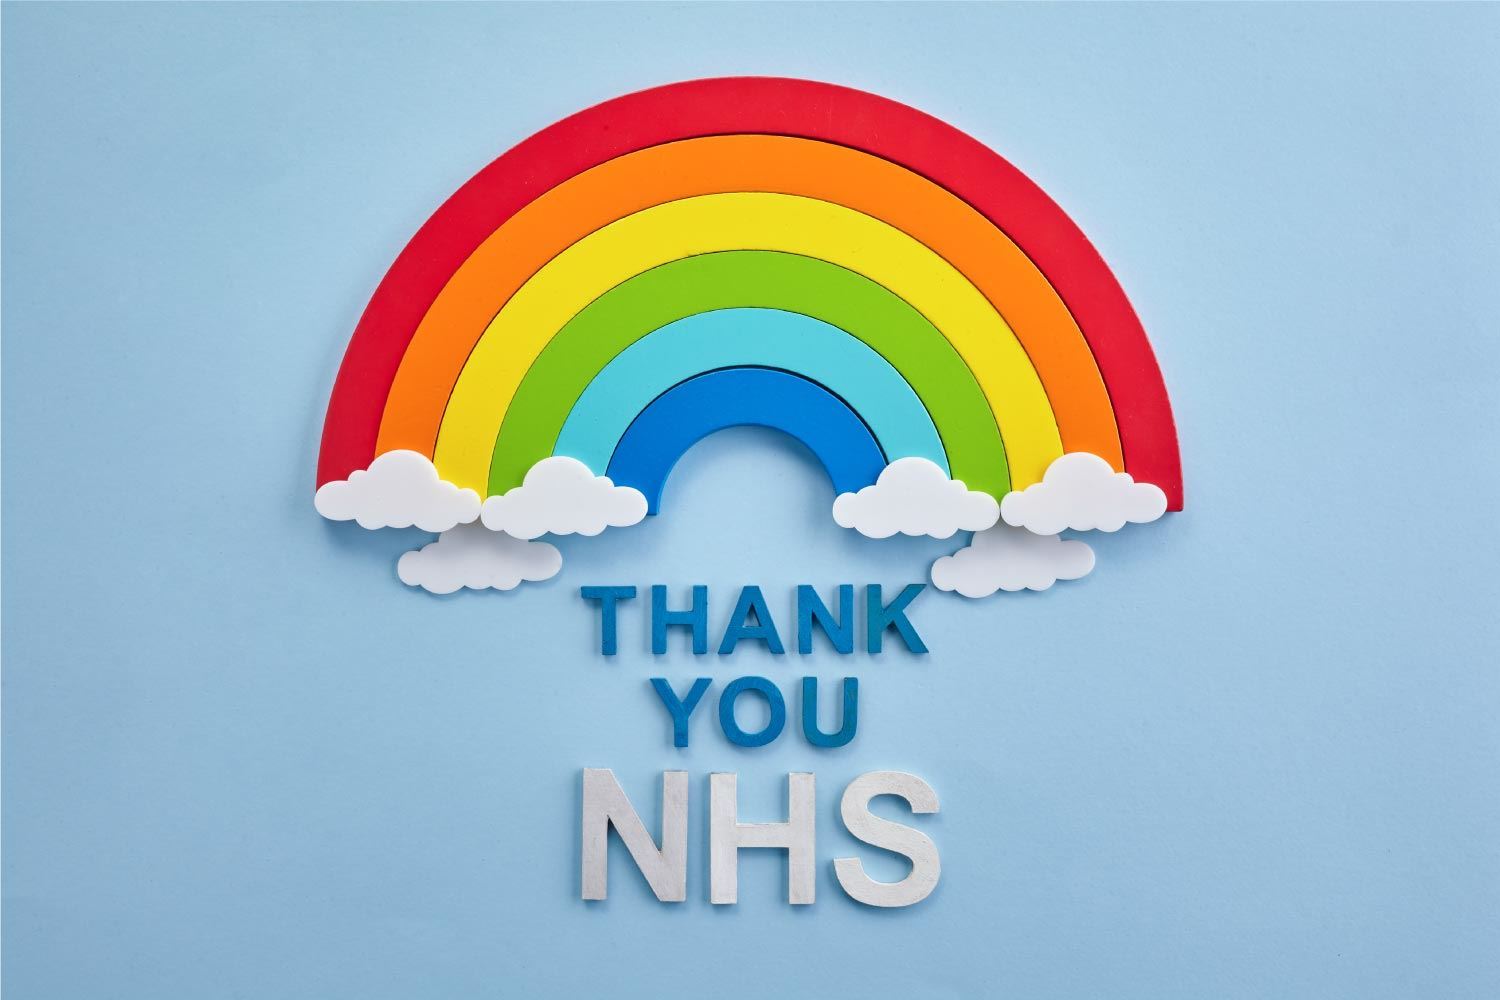 Illustration of NHS rainbow saying thank you for their service.